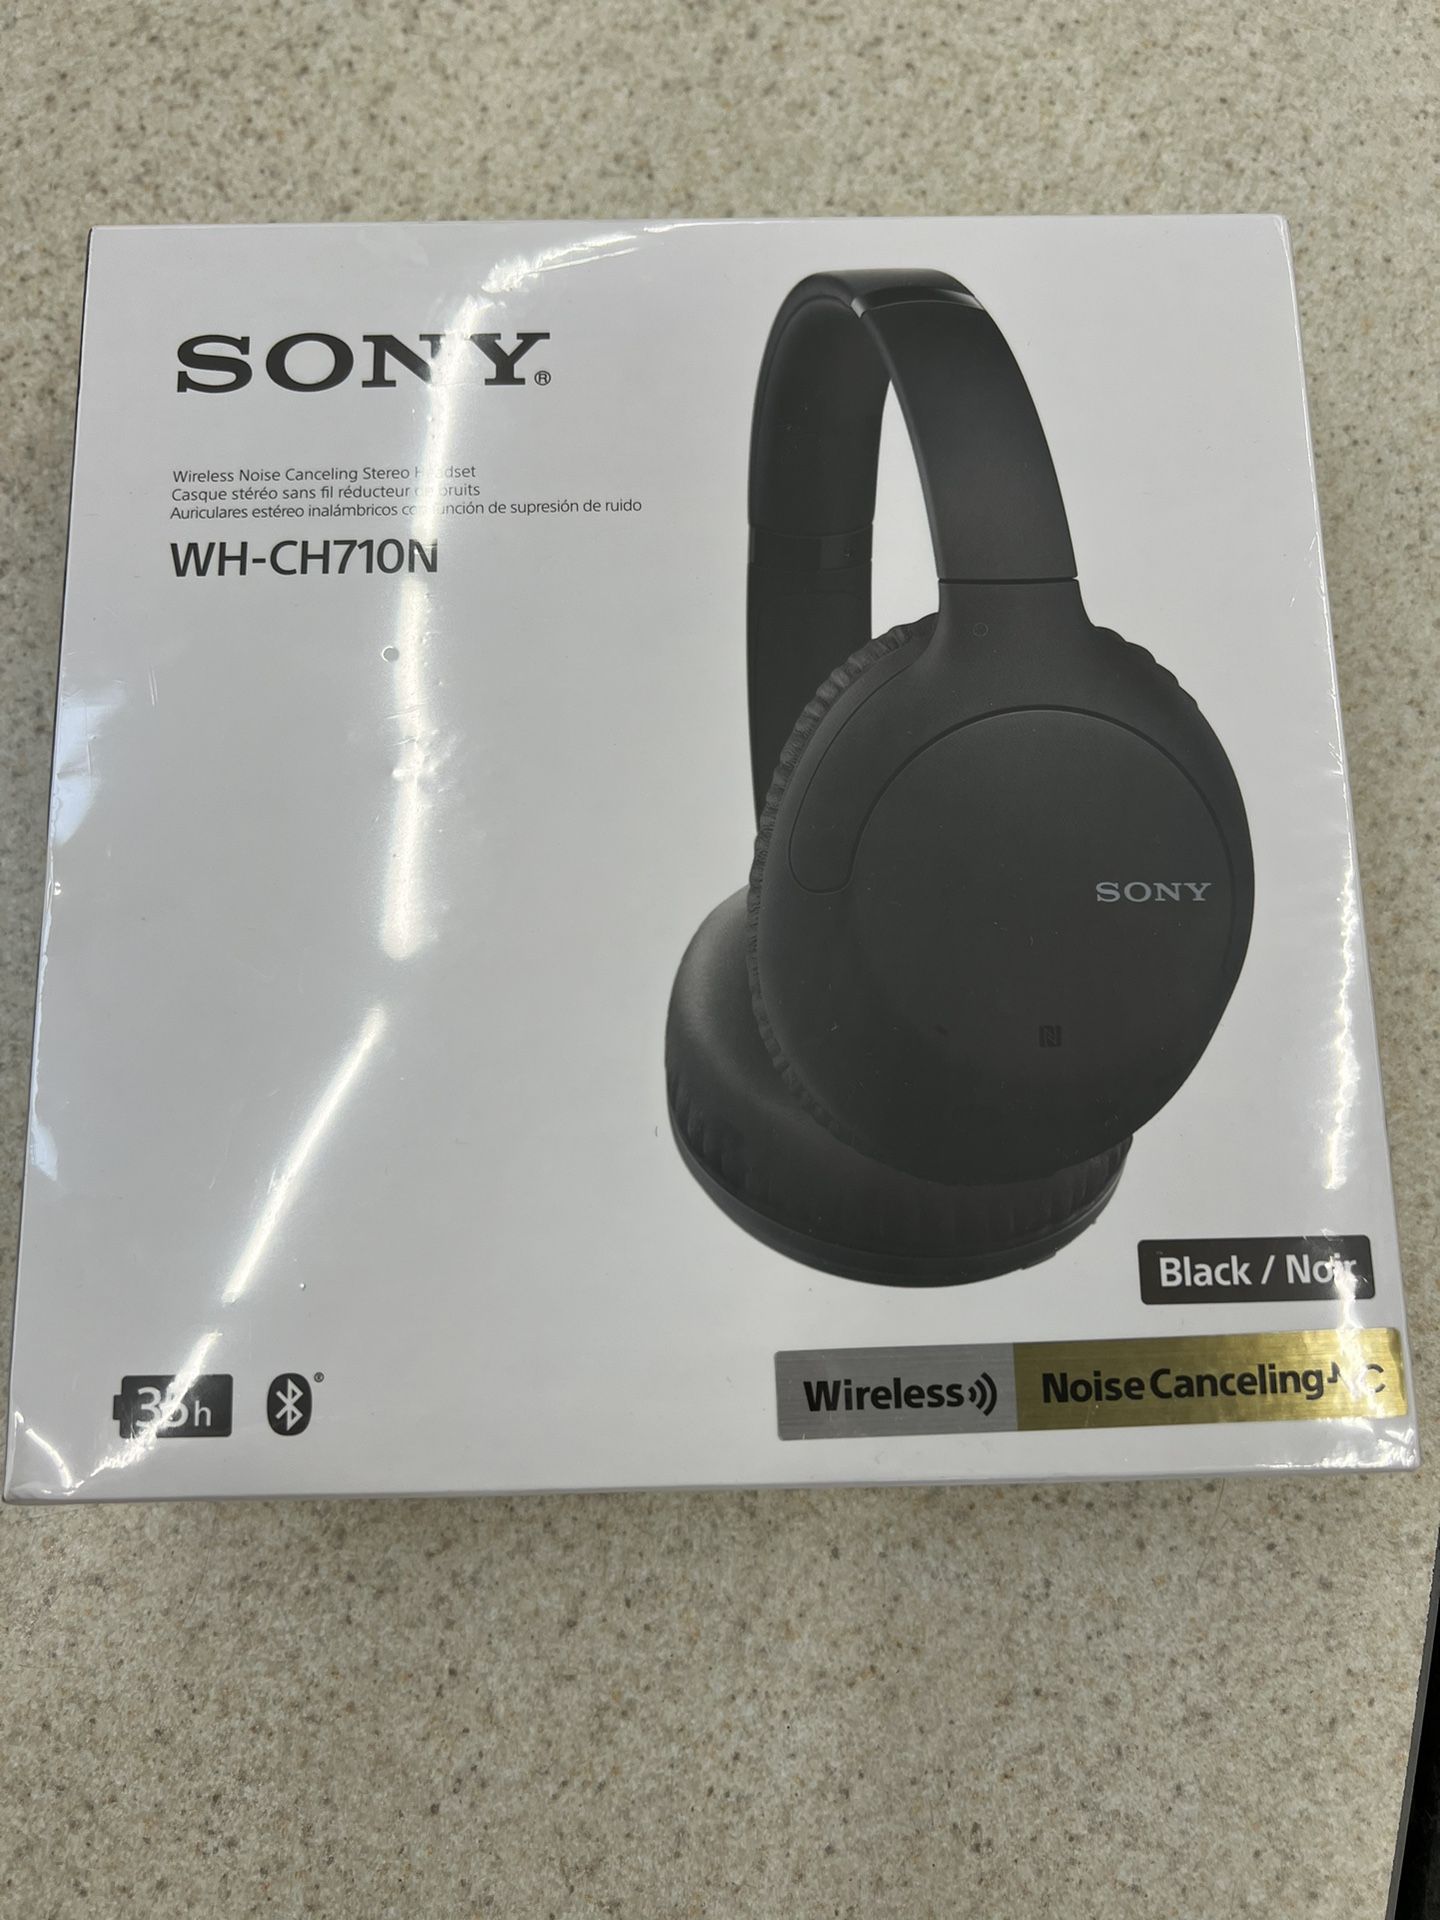 Sony WH-CH710 Wireless & Noise Cancellation Headphones 